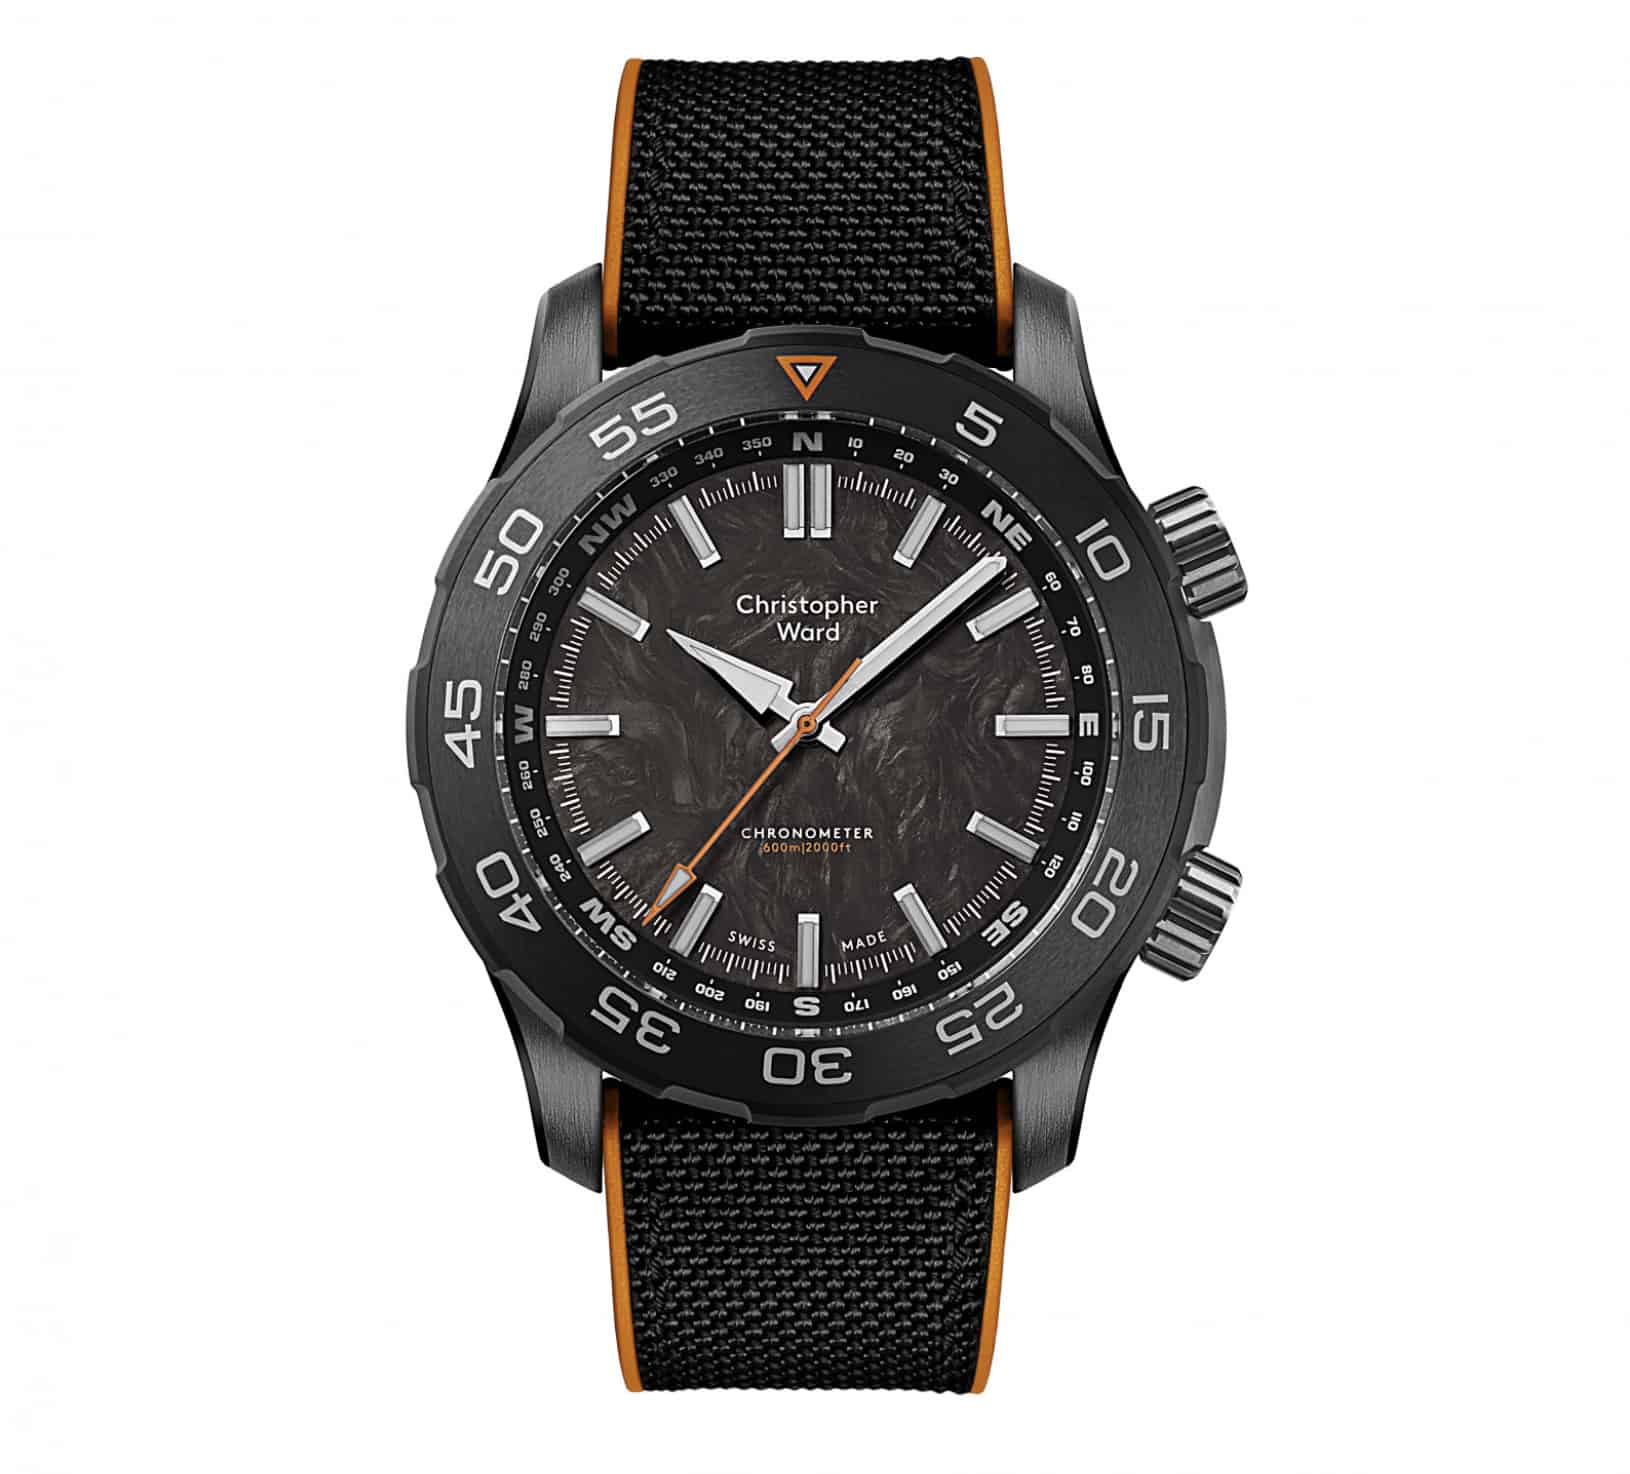 Introducing The Christopher Ward C60 Lympstone